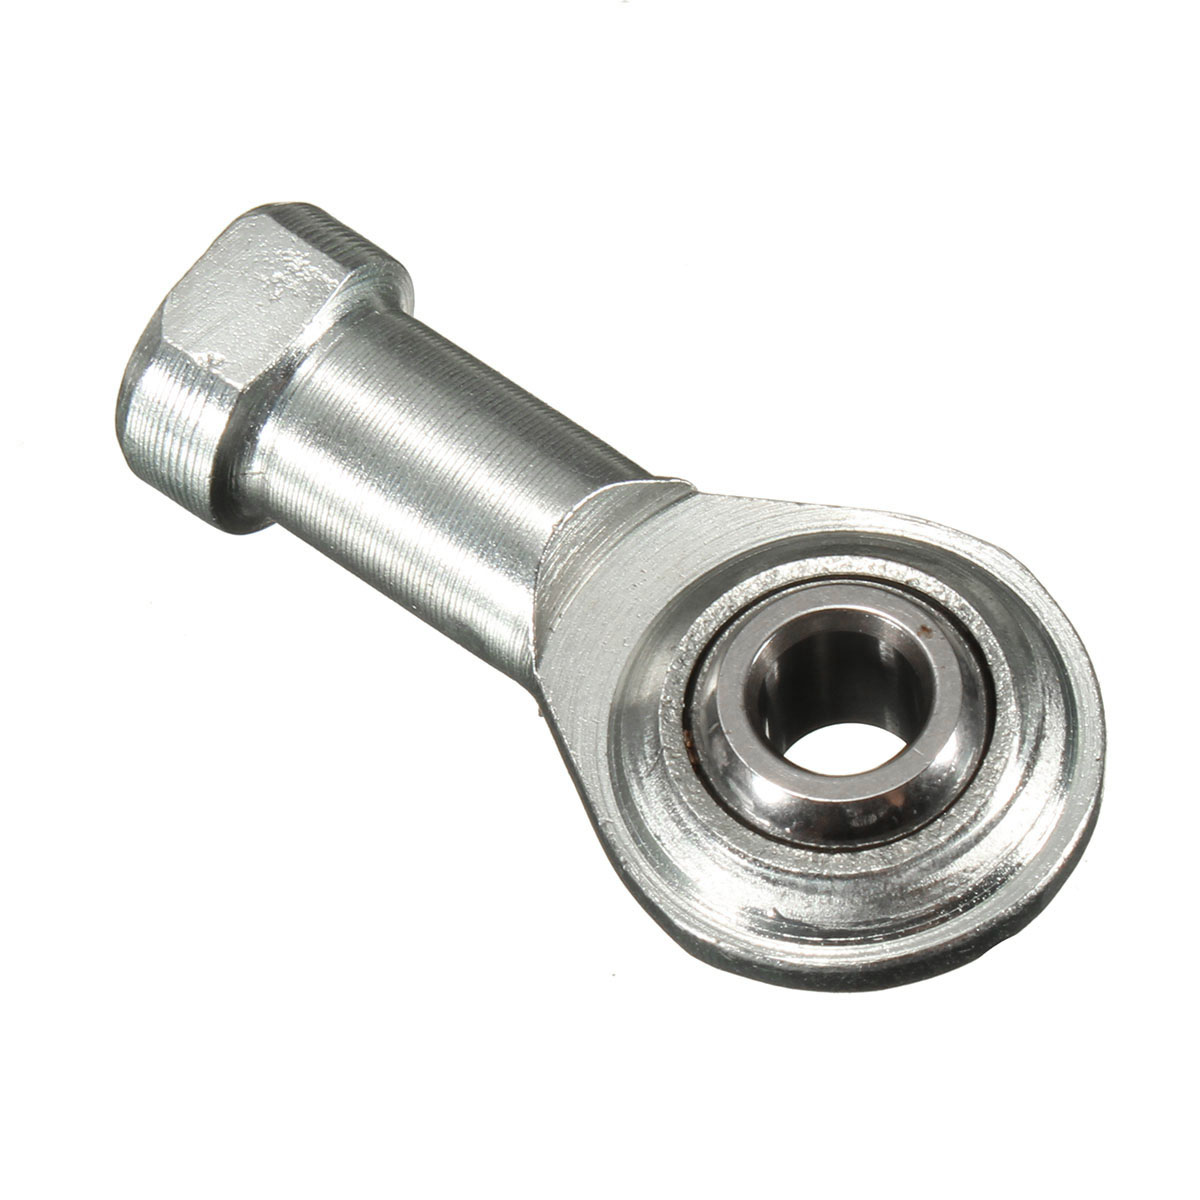 10pcs-M6-x-1mm-Right-Hand-Thread-Rod-End-Joint-Bearing-6mm-Female-Thread-Joint-Ball-Bearing-1586679-2